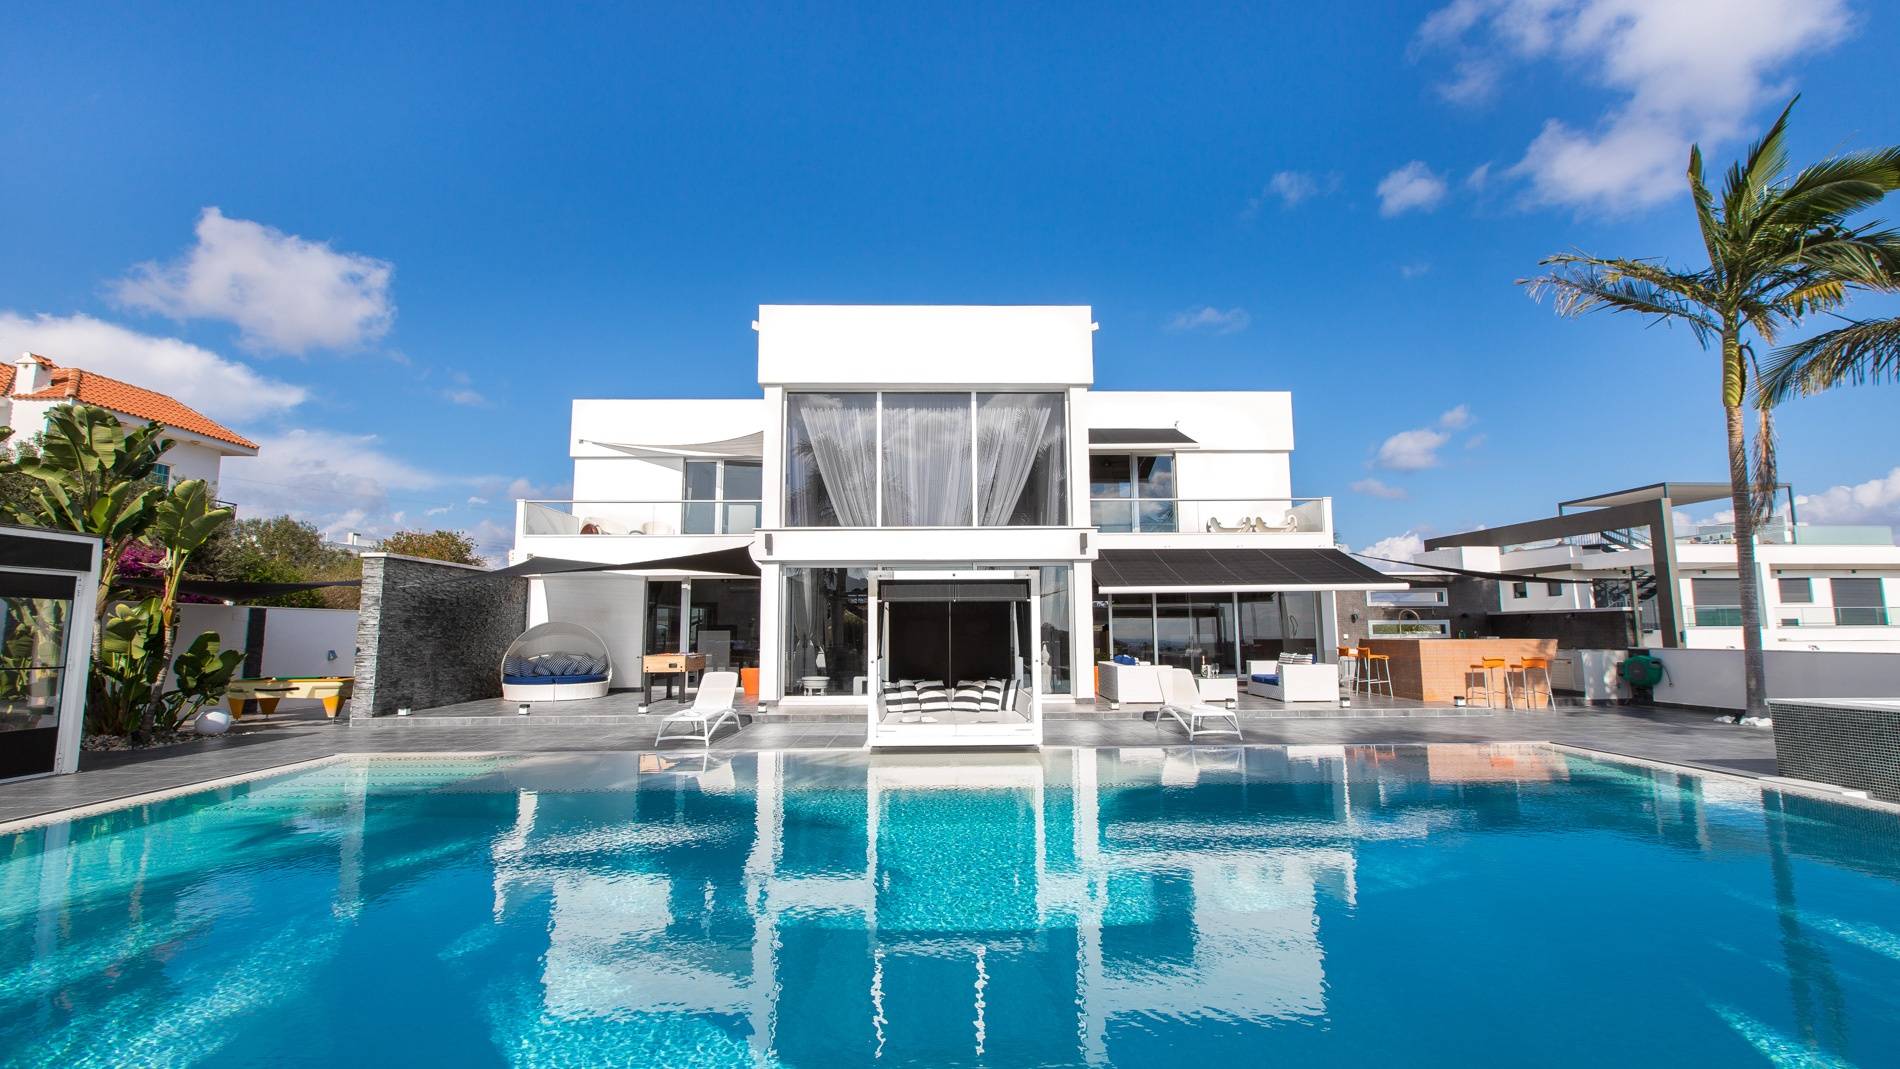 CYPRUS - MODERN BUILT LUXURY HOUSE IN CAPE GRECO